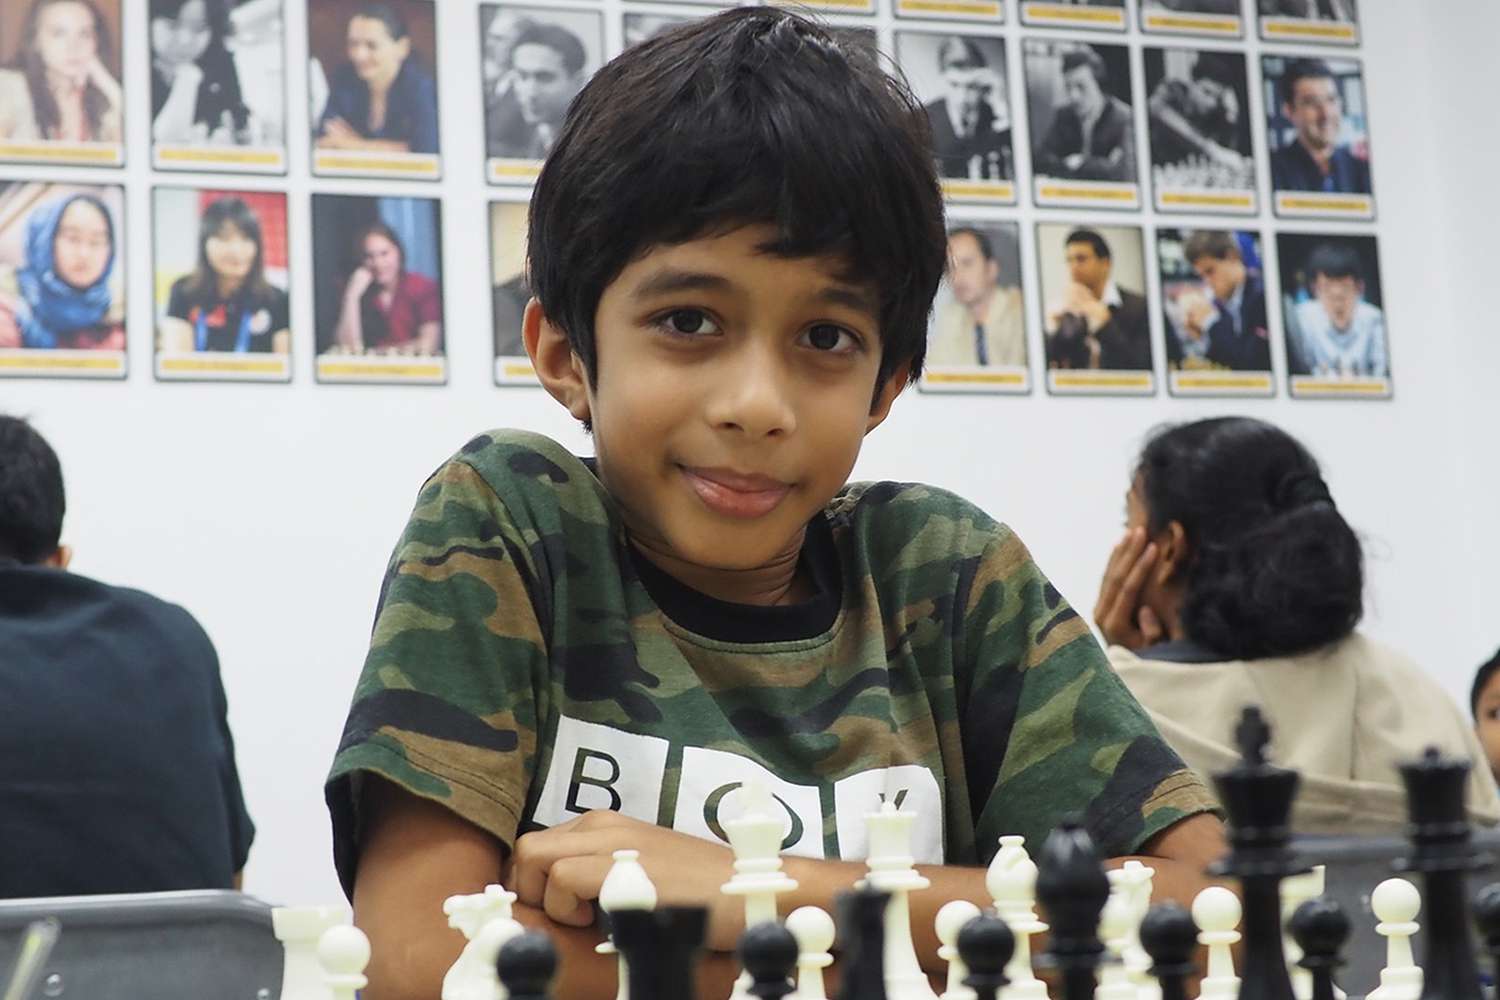 8-year-old chess prodigy makes history by beating 37-year-old grandmaster